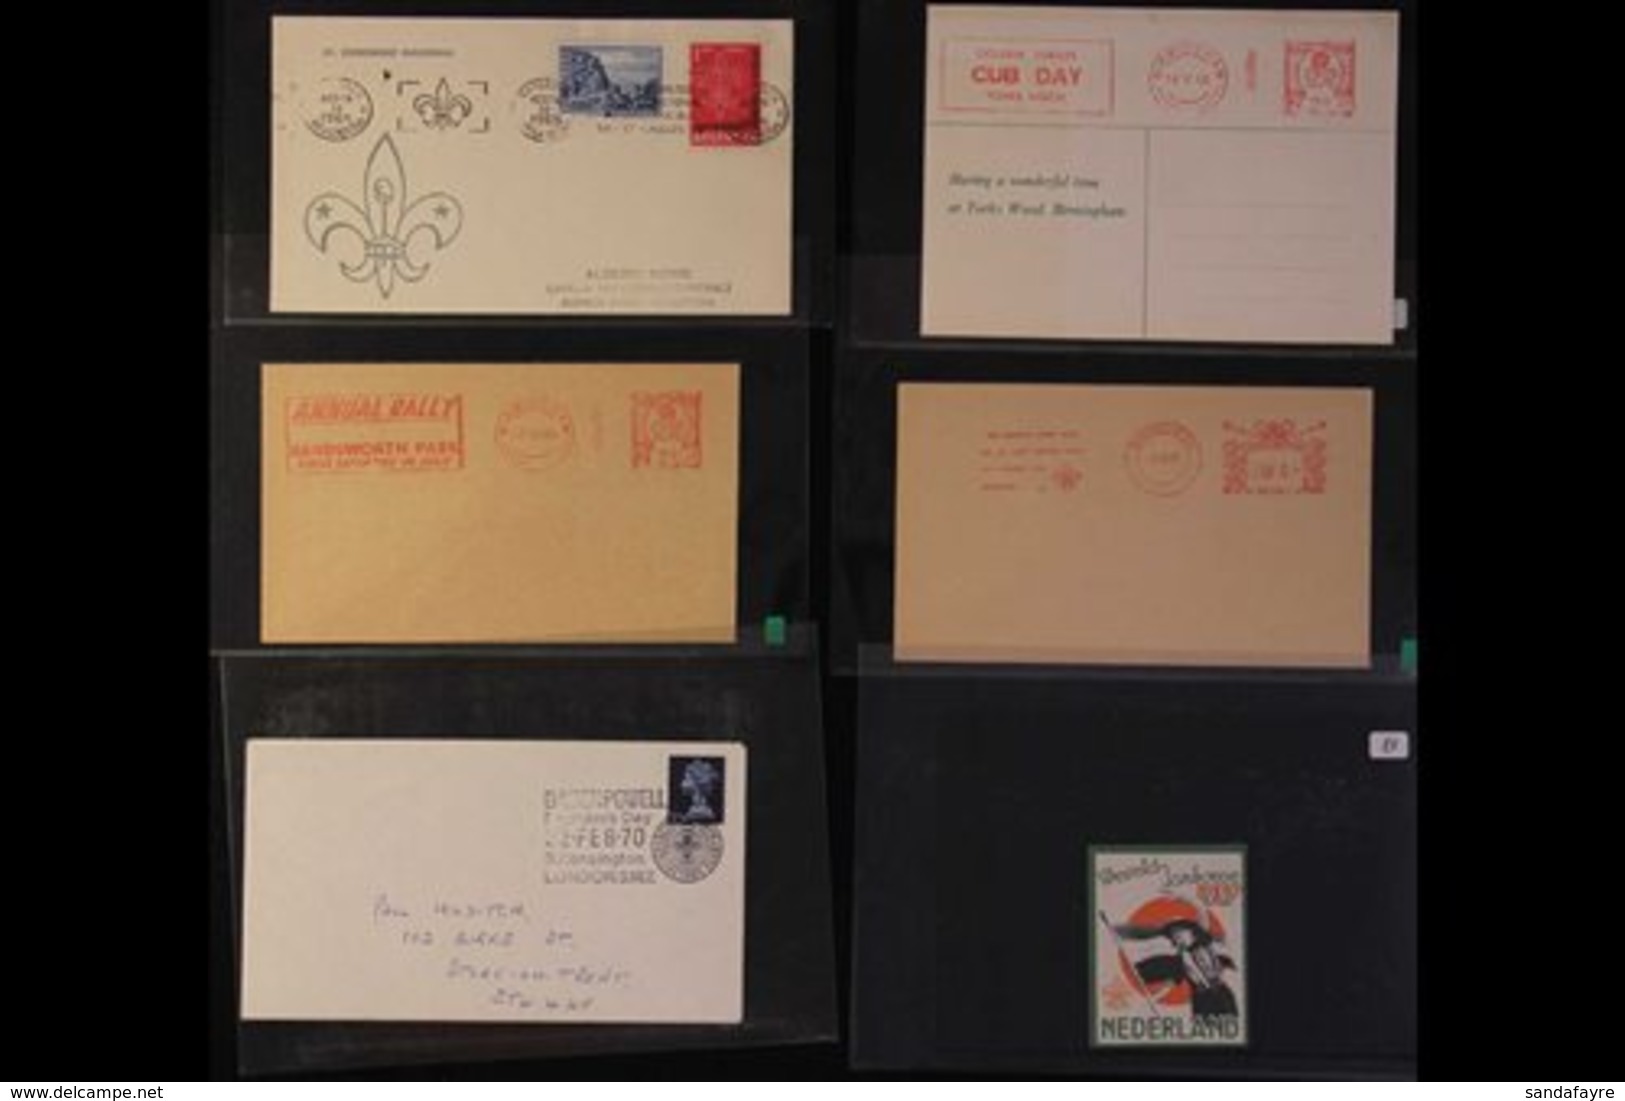 SCOUTS & GUIDES CANCELLATIONS & METER MAIL - All With A Scouting Theme, We See A Range Of 1960s/70s Covers And Postcards - Unclassified